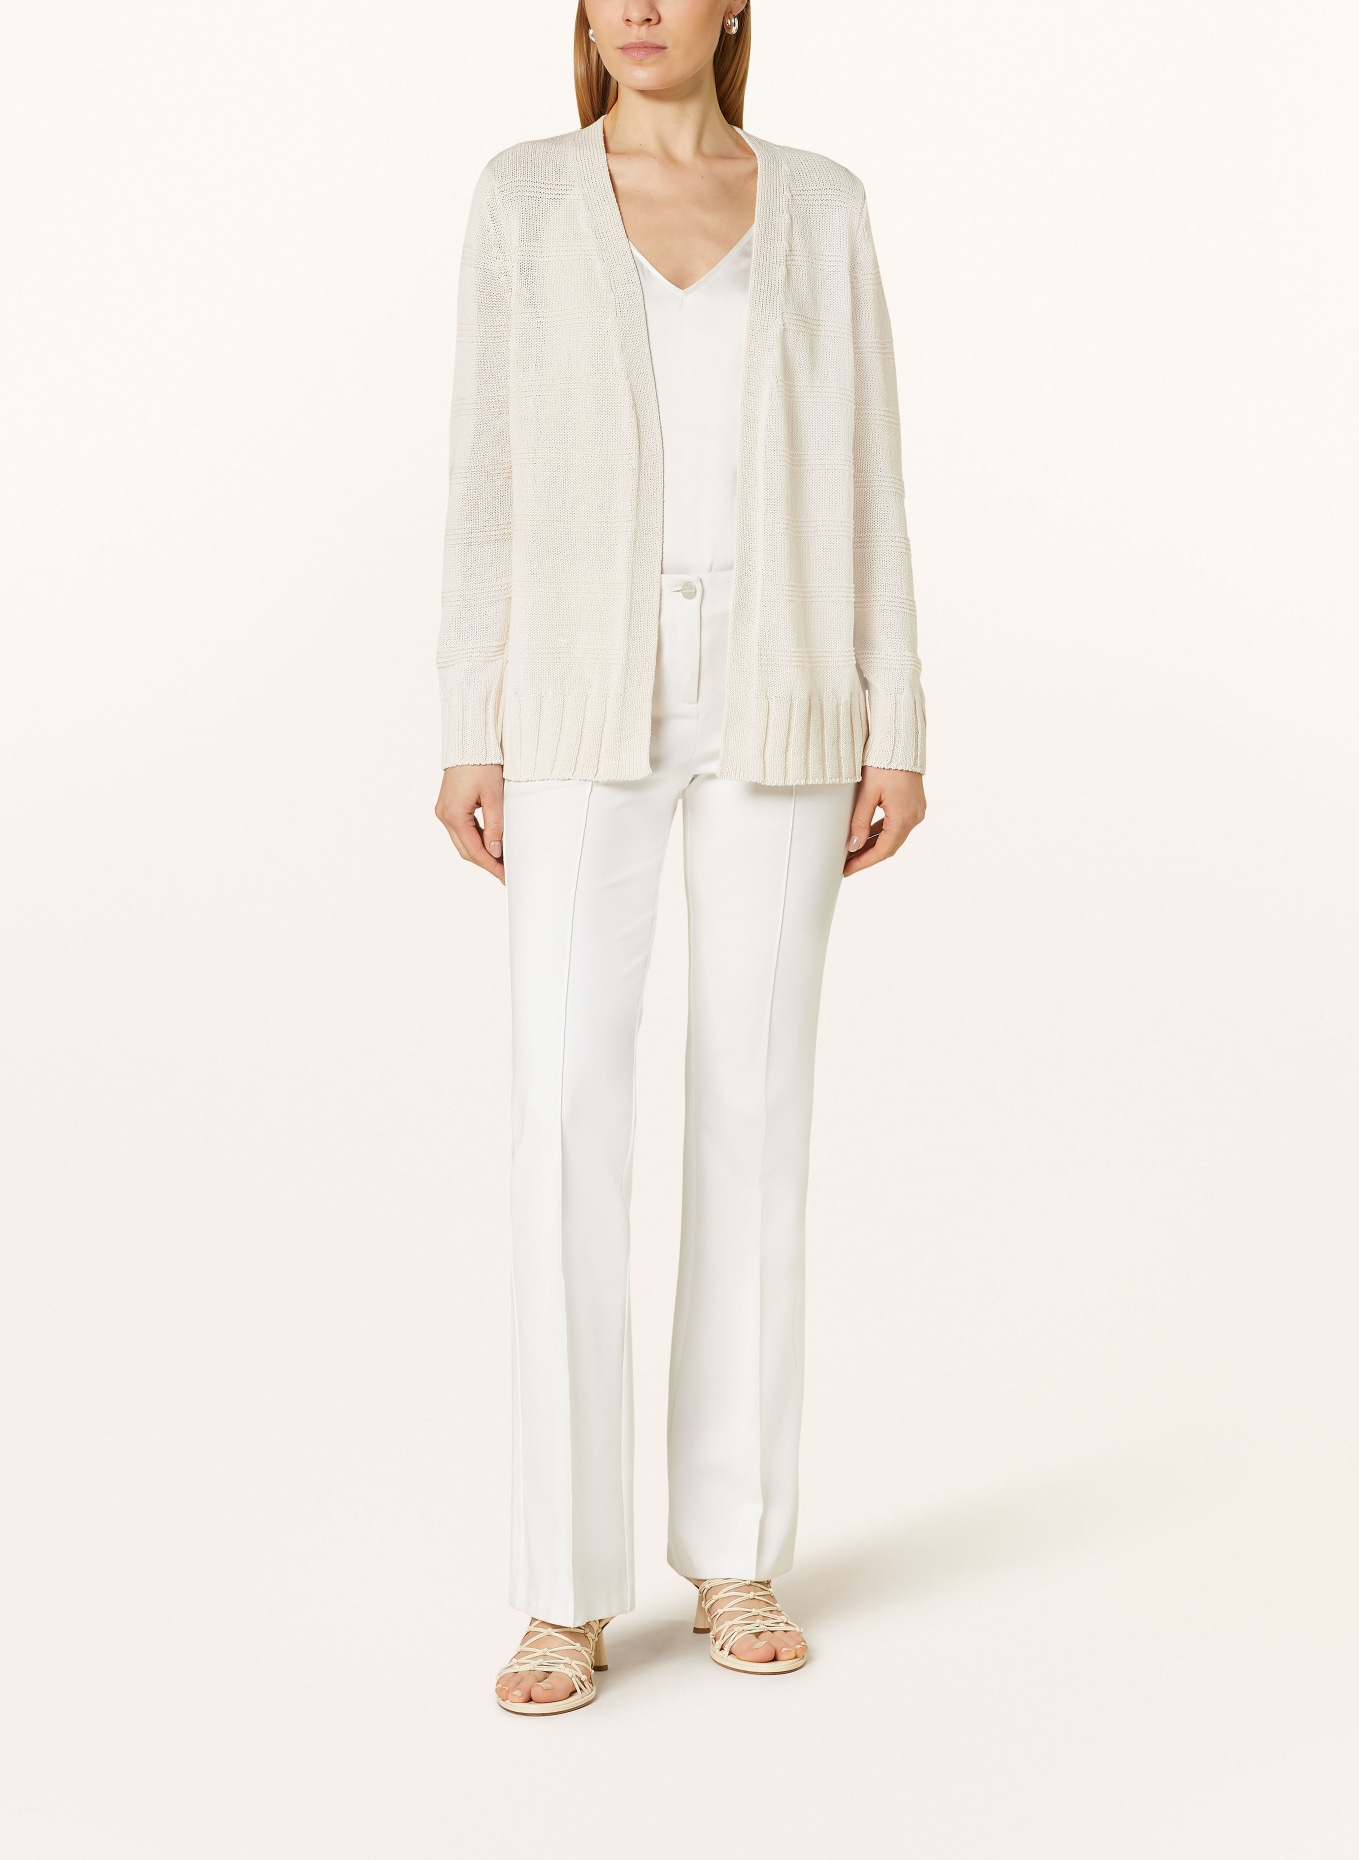 MAERZ MUENCHEN Knit cardigan, Color: CREAM (Image 2)